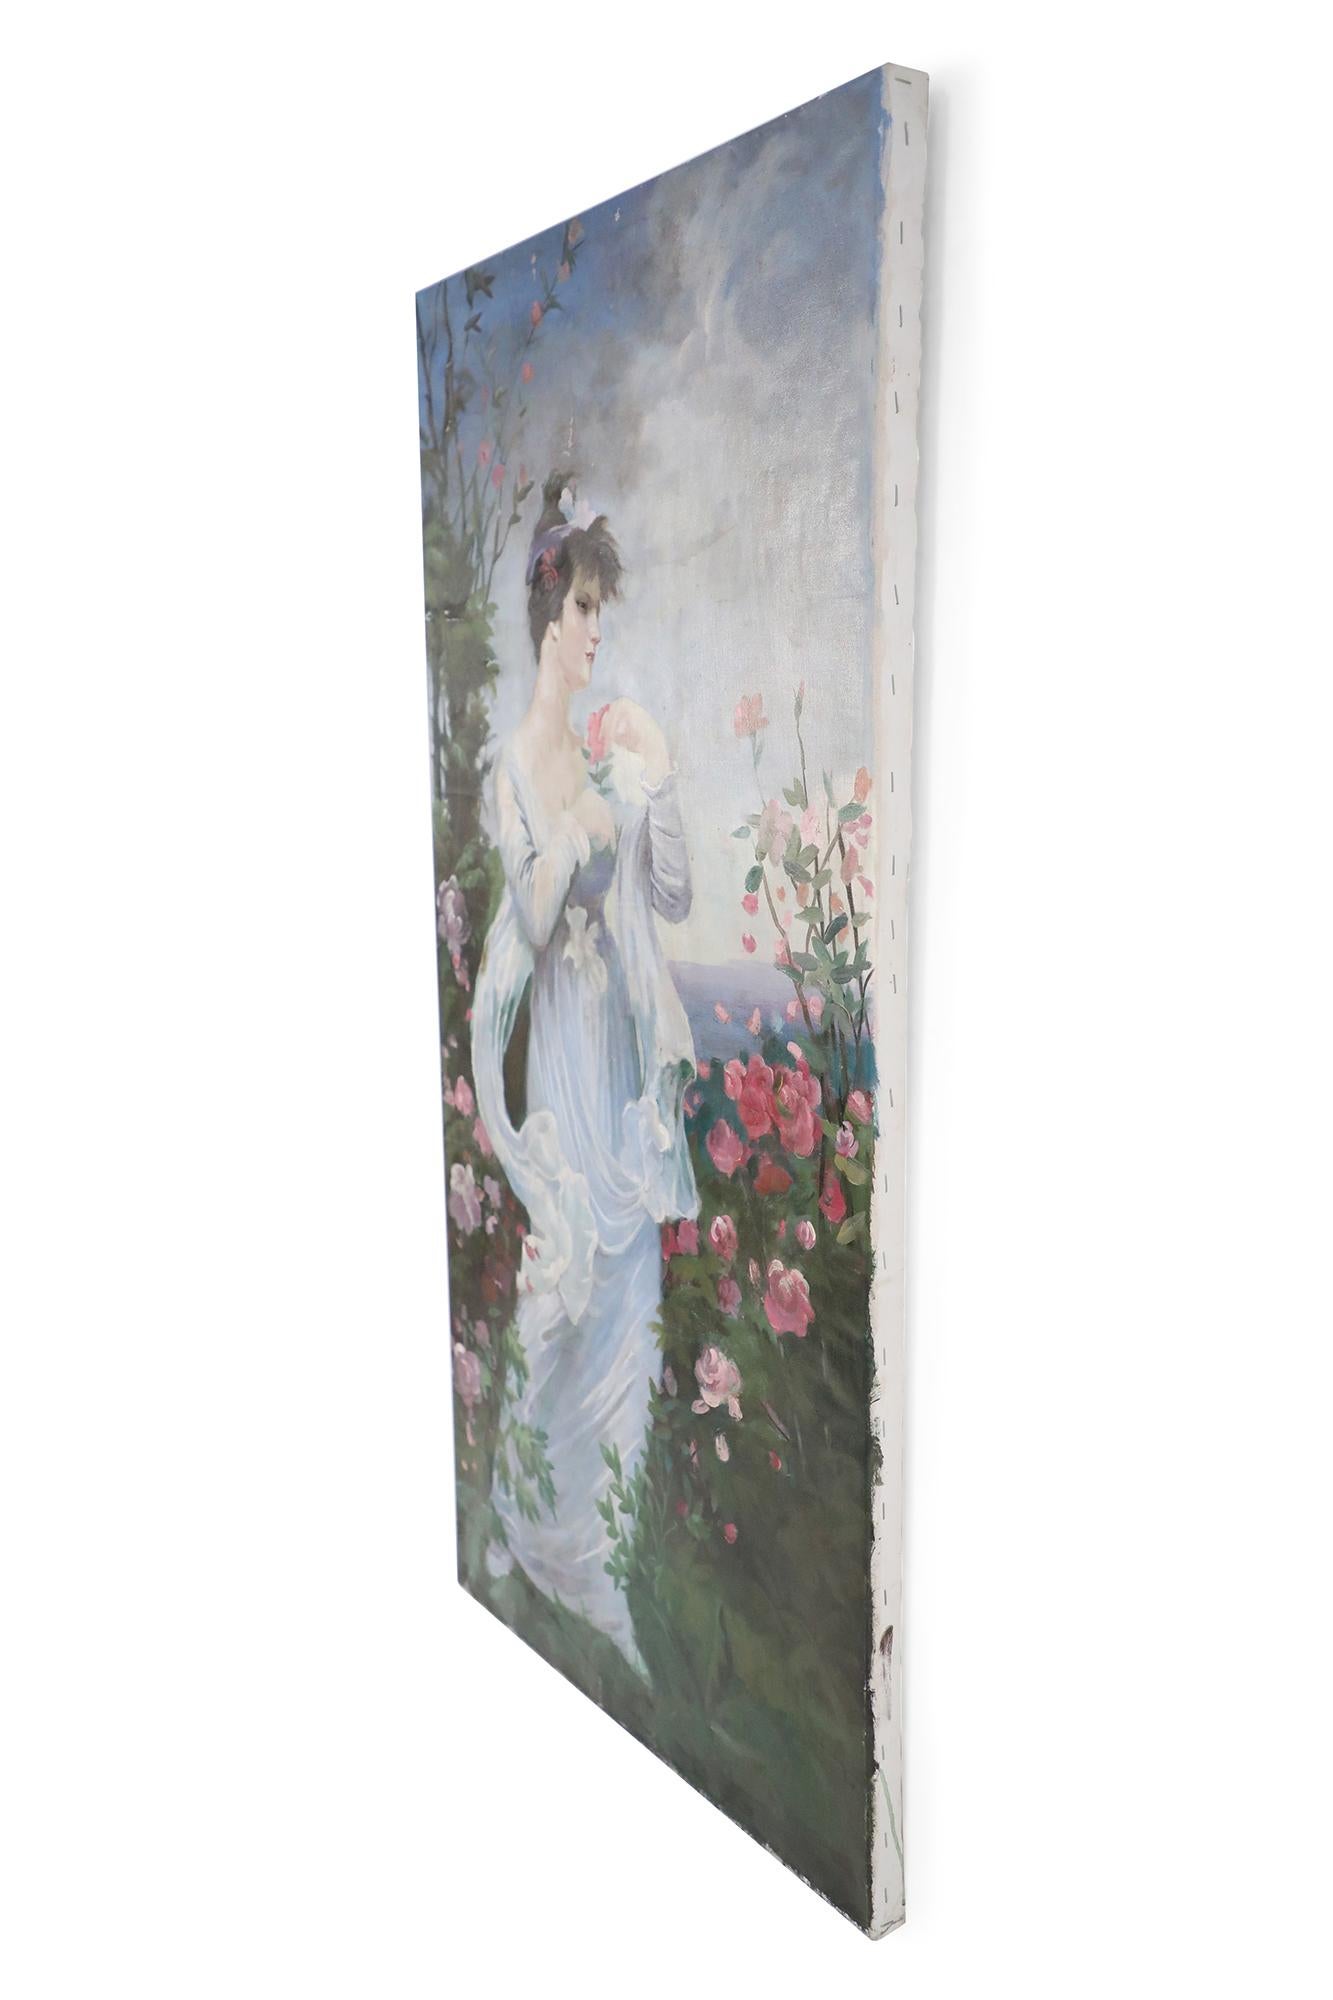 Vintage neoclassical-style (20th Century) oil painting capturing a woman in a billowing white dress standing in a garden brimming with pink roses, with sea and sky in distant view. Painted on unframed canvas.
    